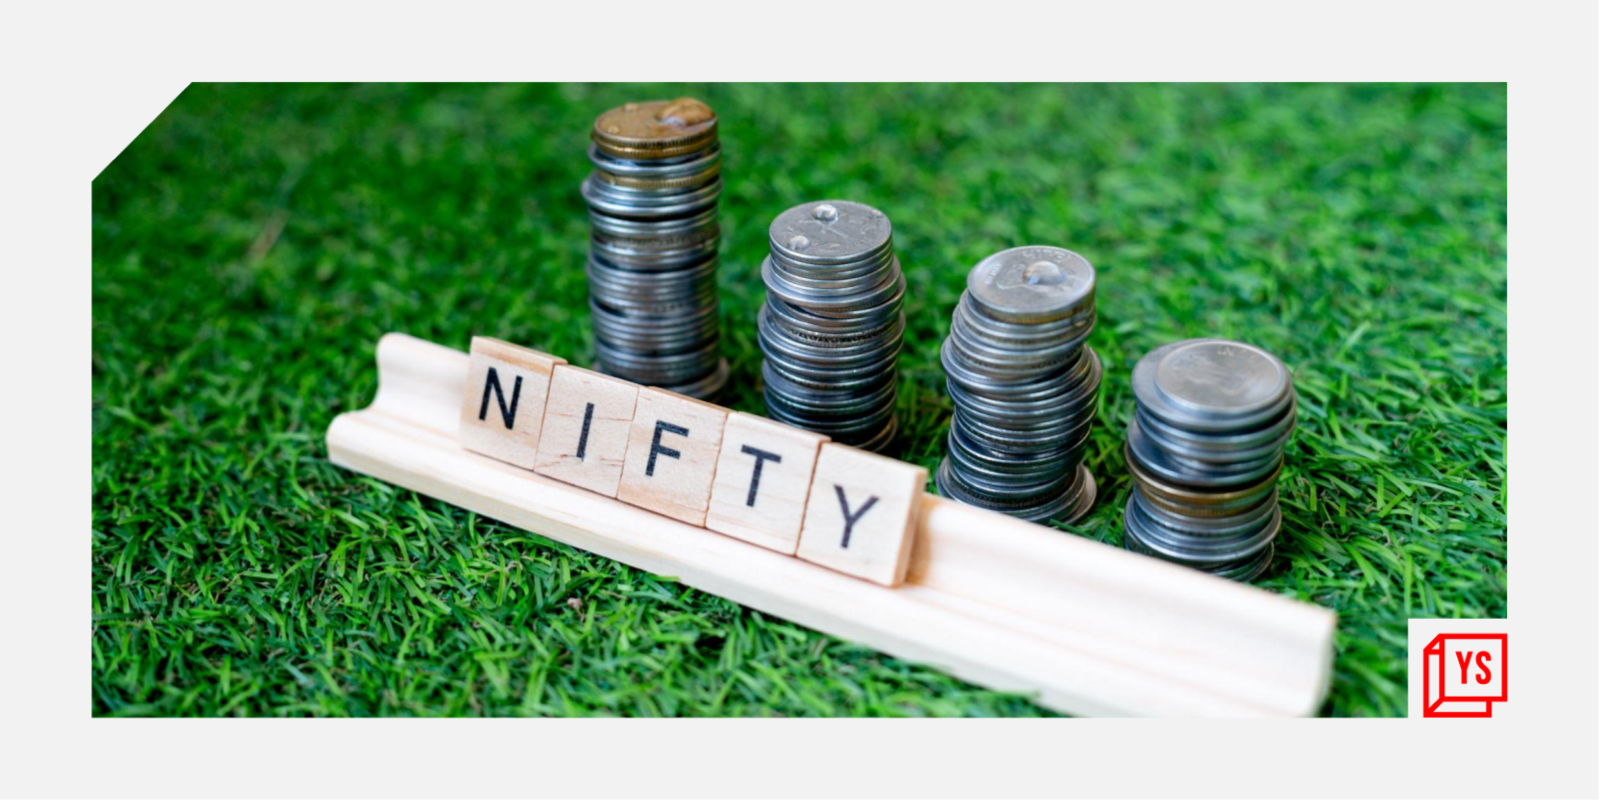 What will NIFTY look like in five years? How to prepare your investment strategy?

